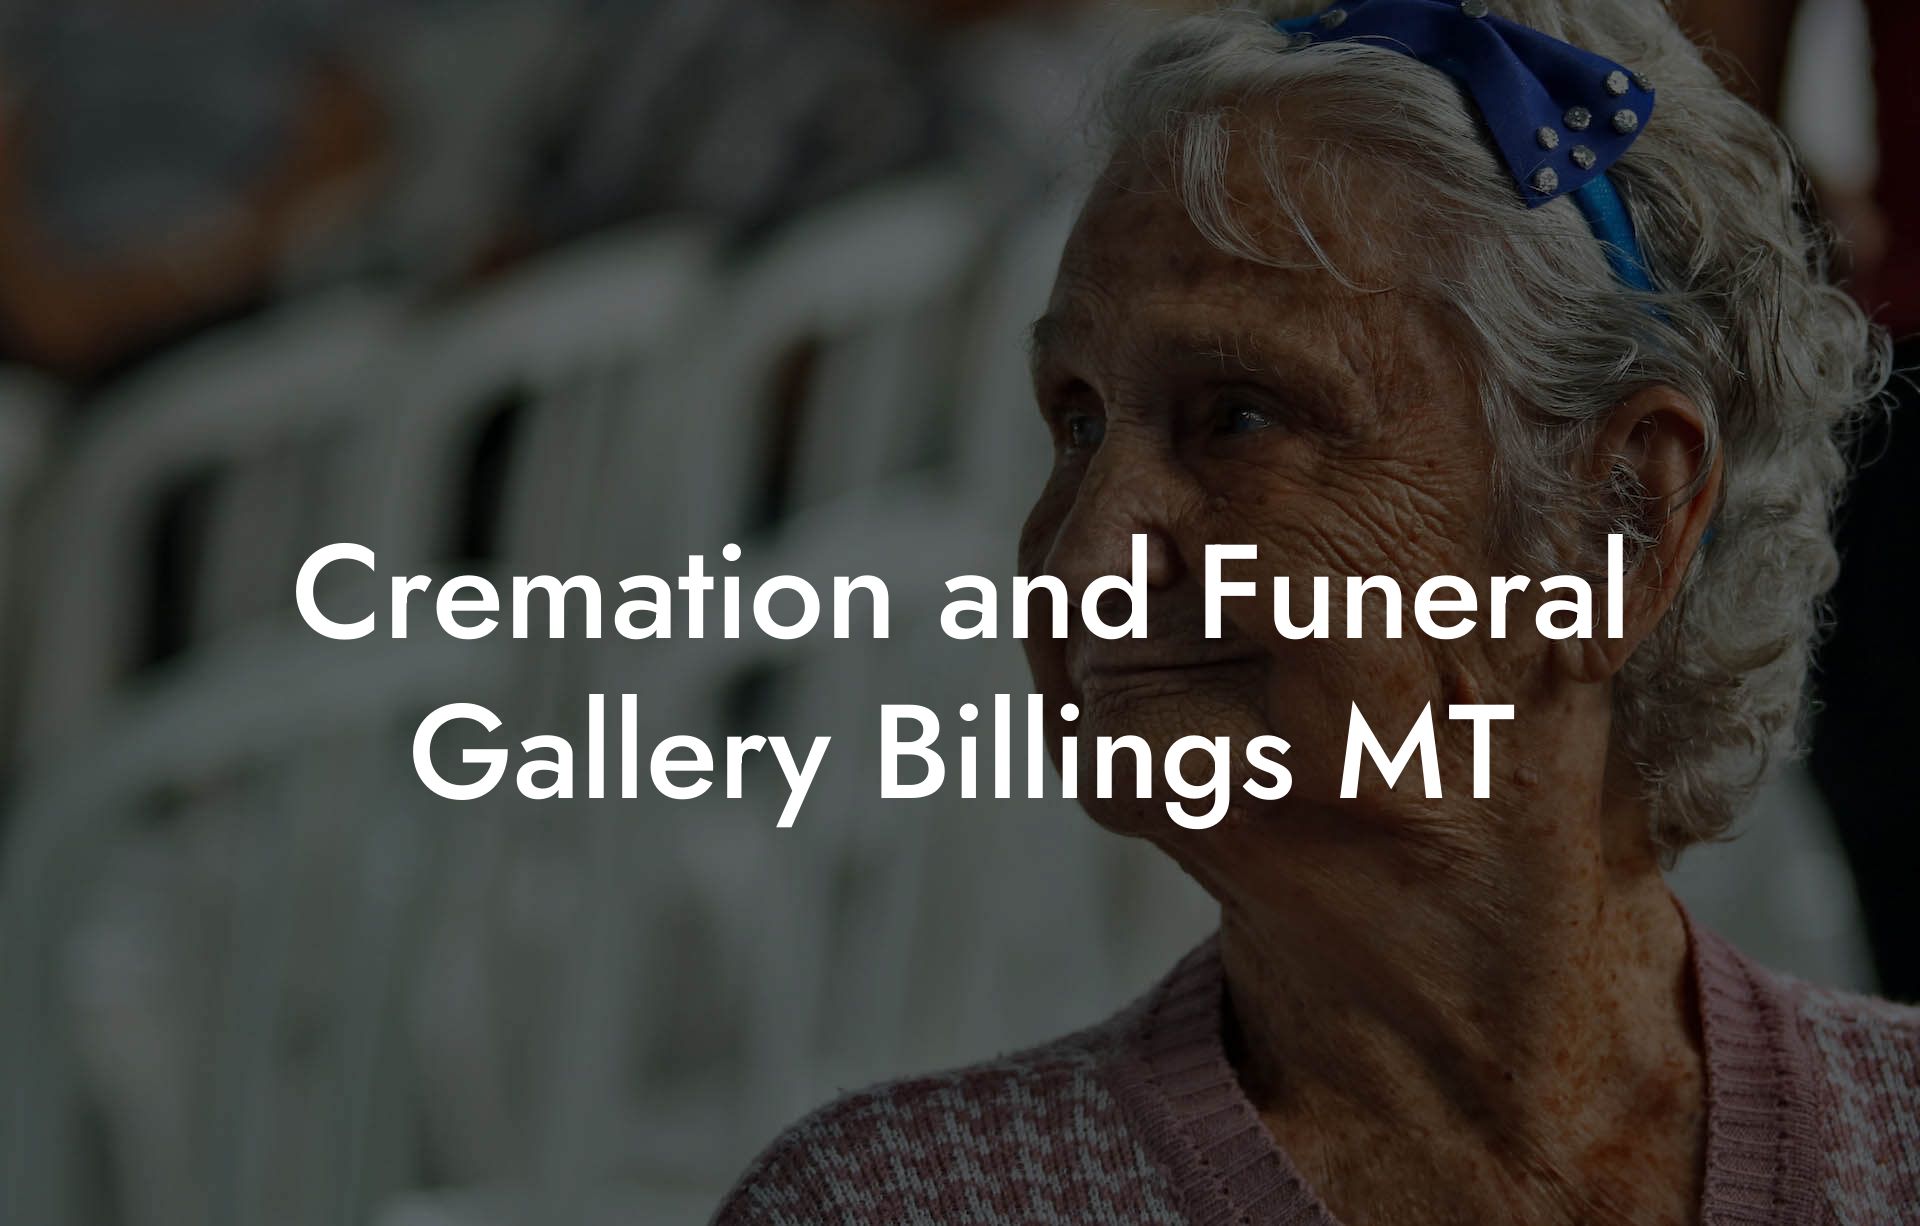 Cremation and Funeral Gallery Billings MT